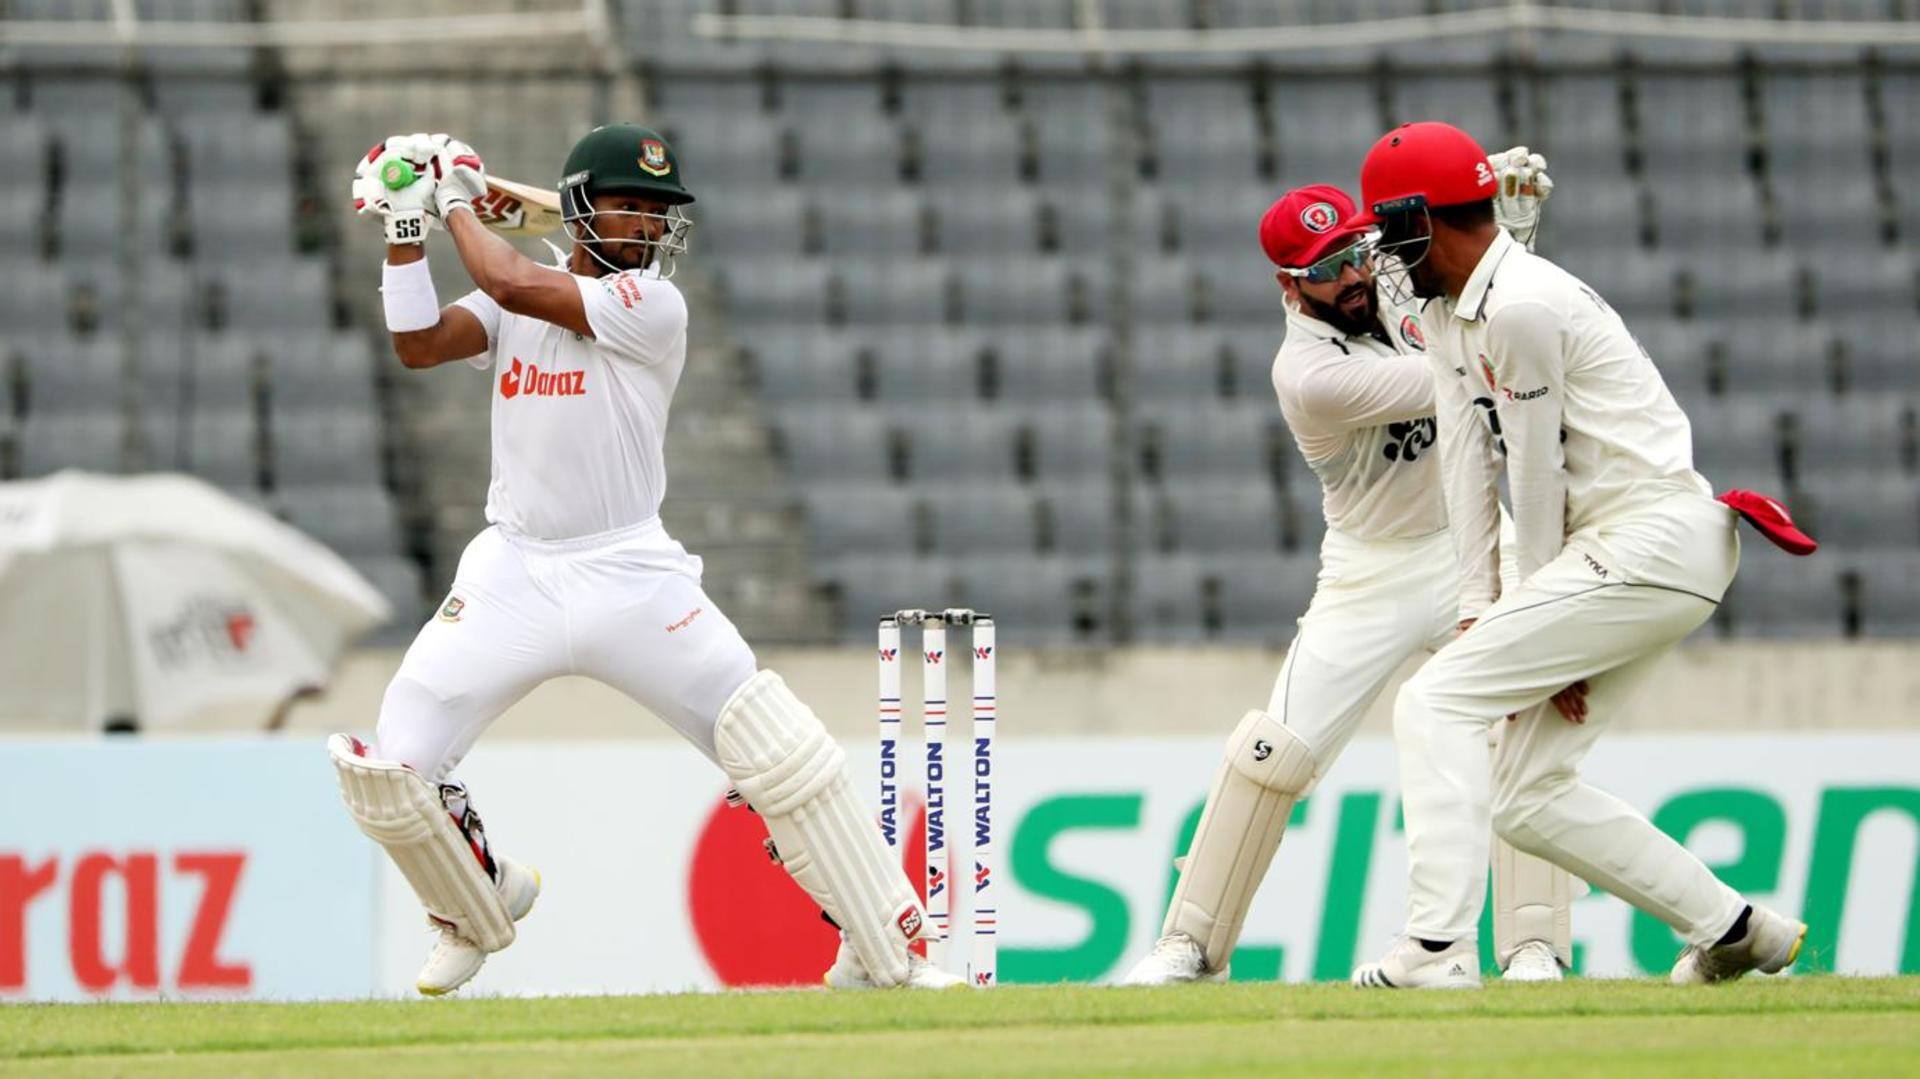 One-off Test: Najmul Hossain Shanto smokes twin centuries against Afghanistan